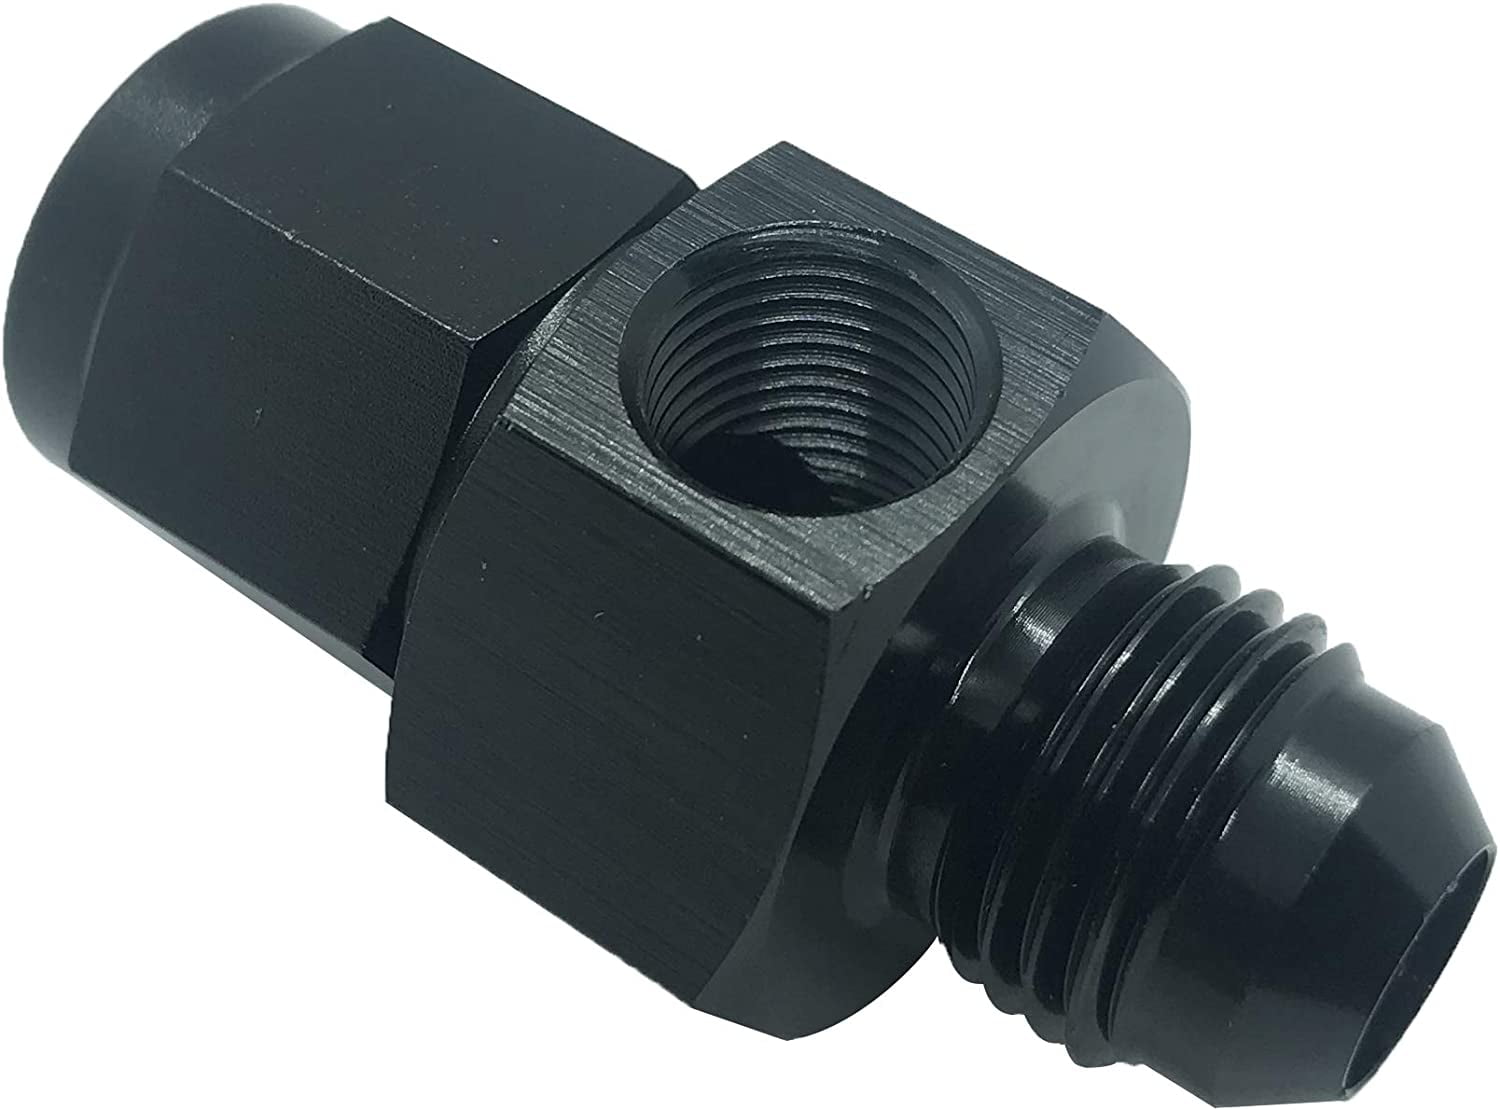 AN6 Thread Coupler Aluminium Anodized Female to Female an-6 Union Connector Fuel Hose Fitting Adapter 